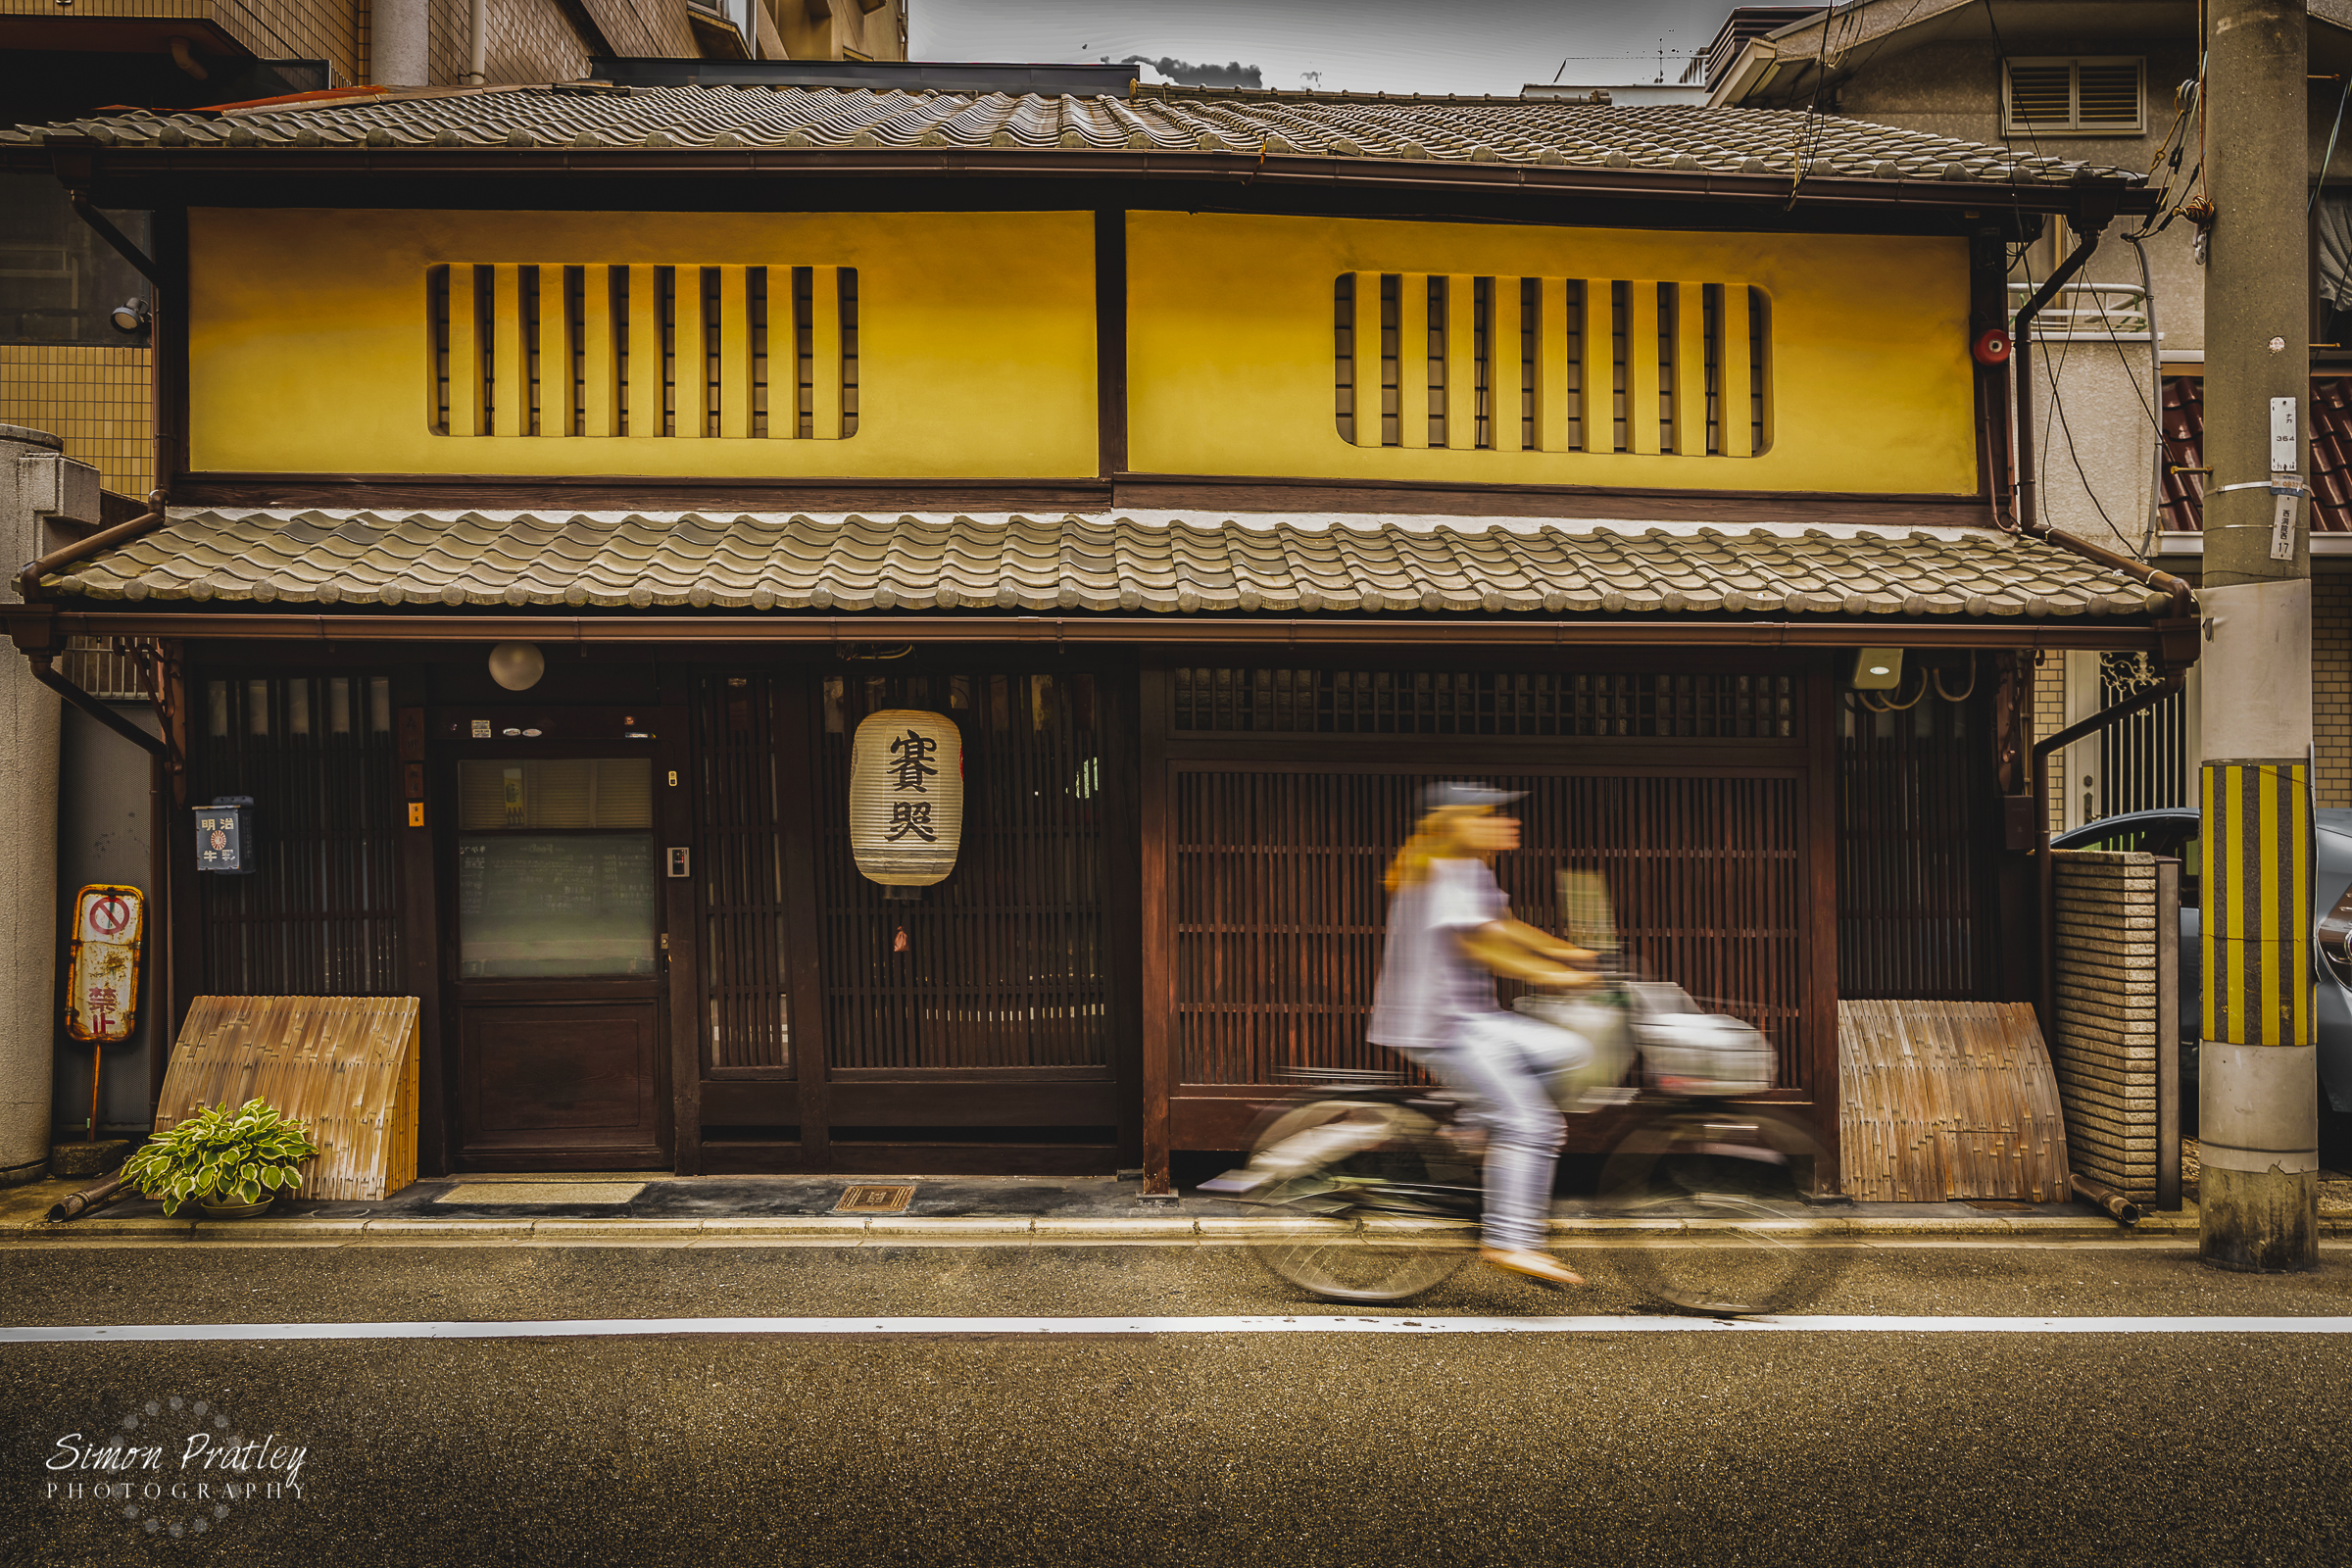 Streets of Kyoto